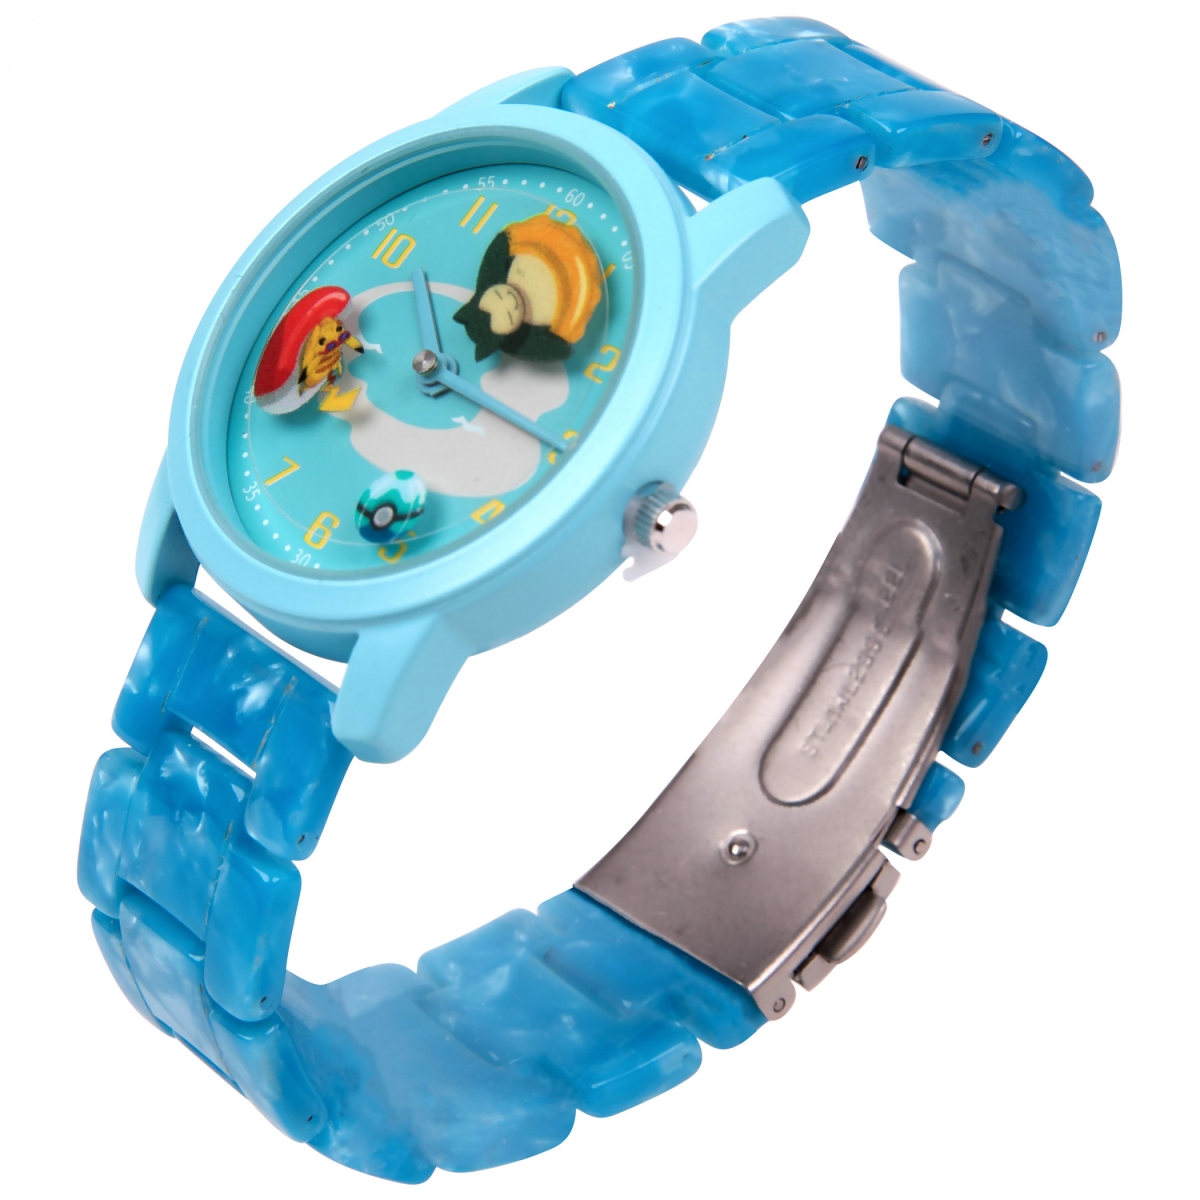 Pokemon 833641 Water Fun Time Watch with Rotating Watch Face